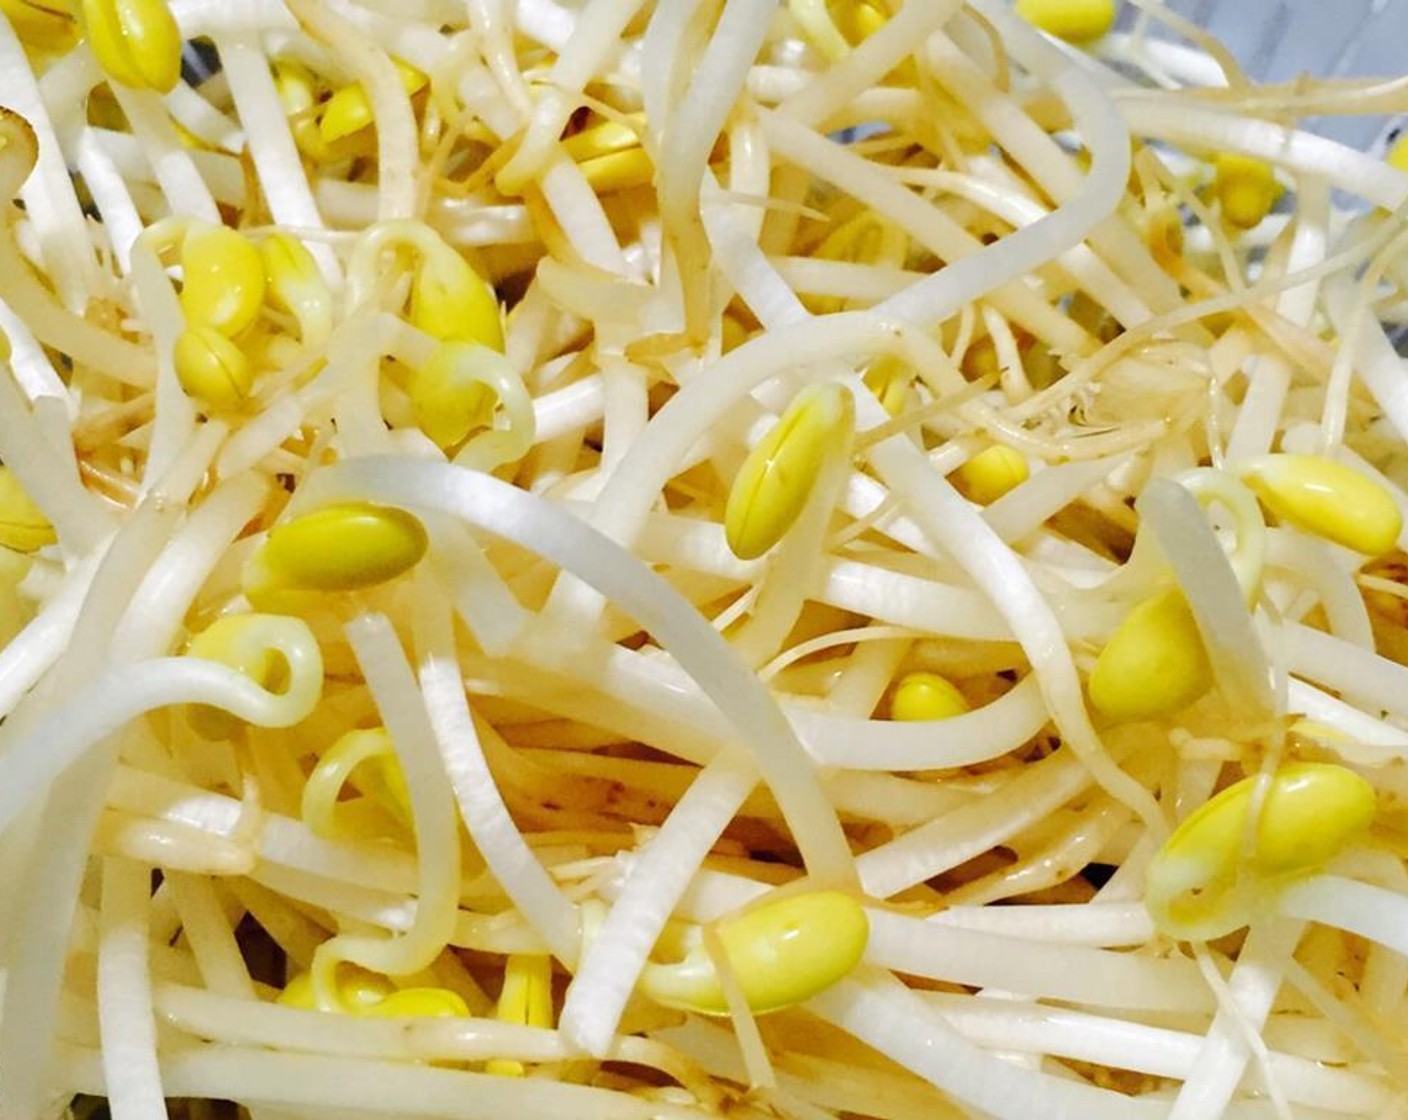 step 2 Rinse the Bean Sprouts (3 cups) thoroughly, discarding any that are no good.